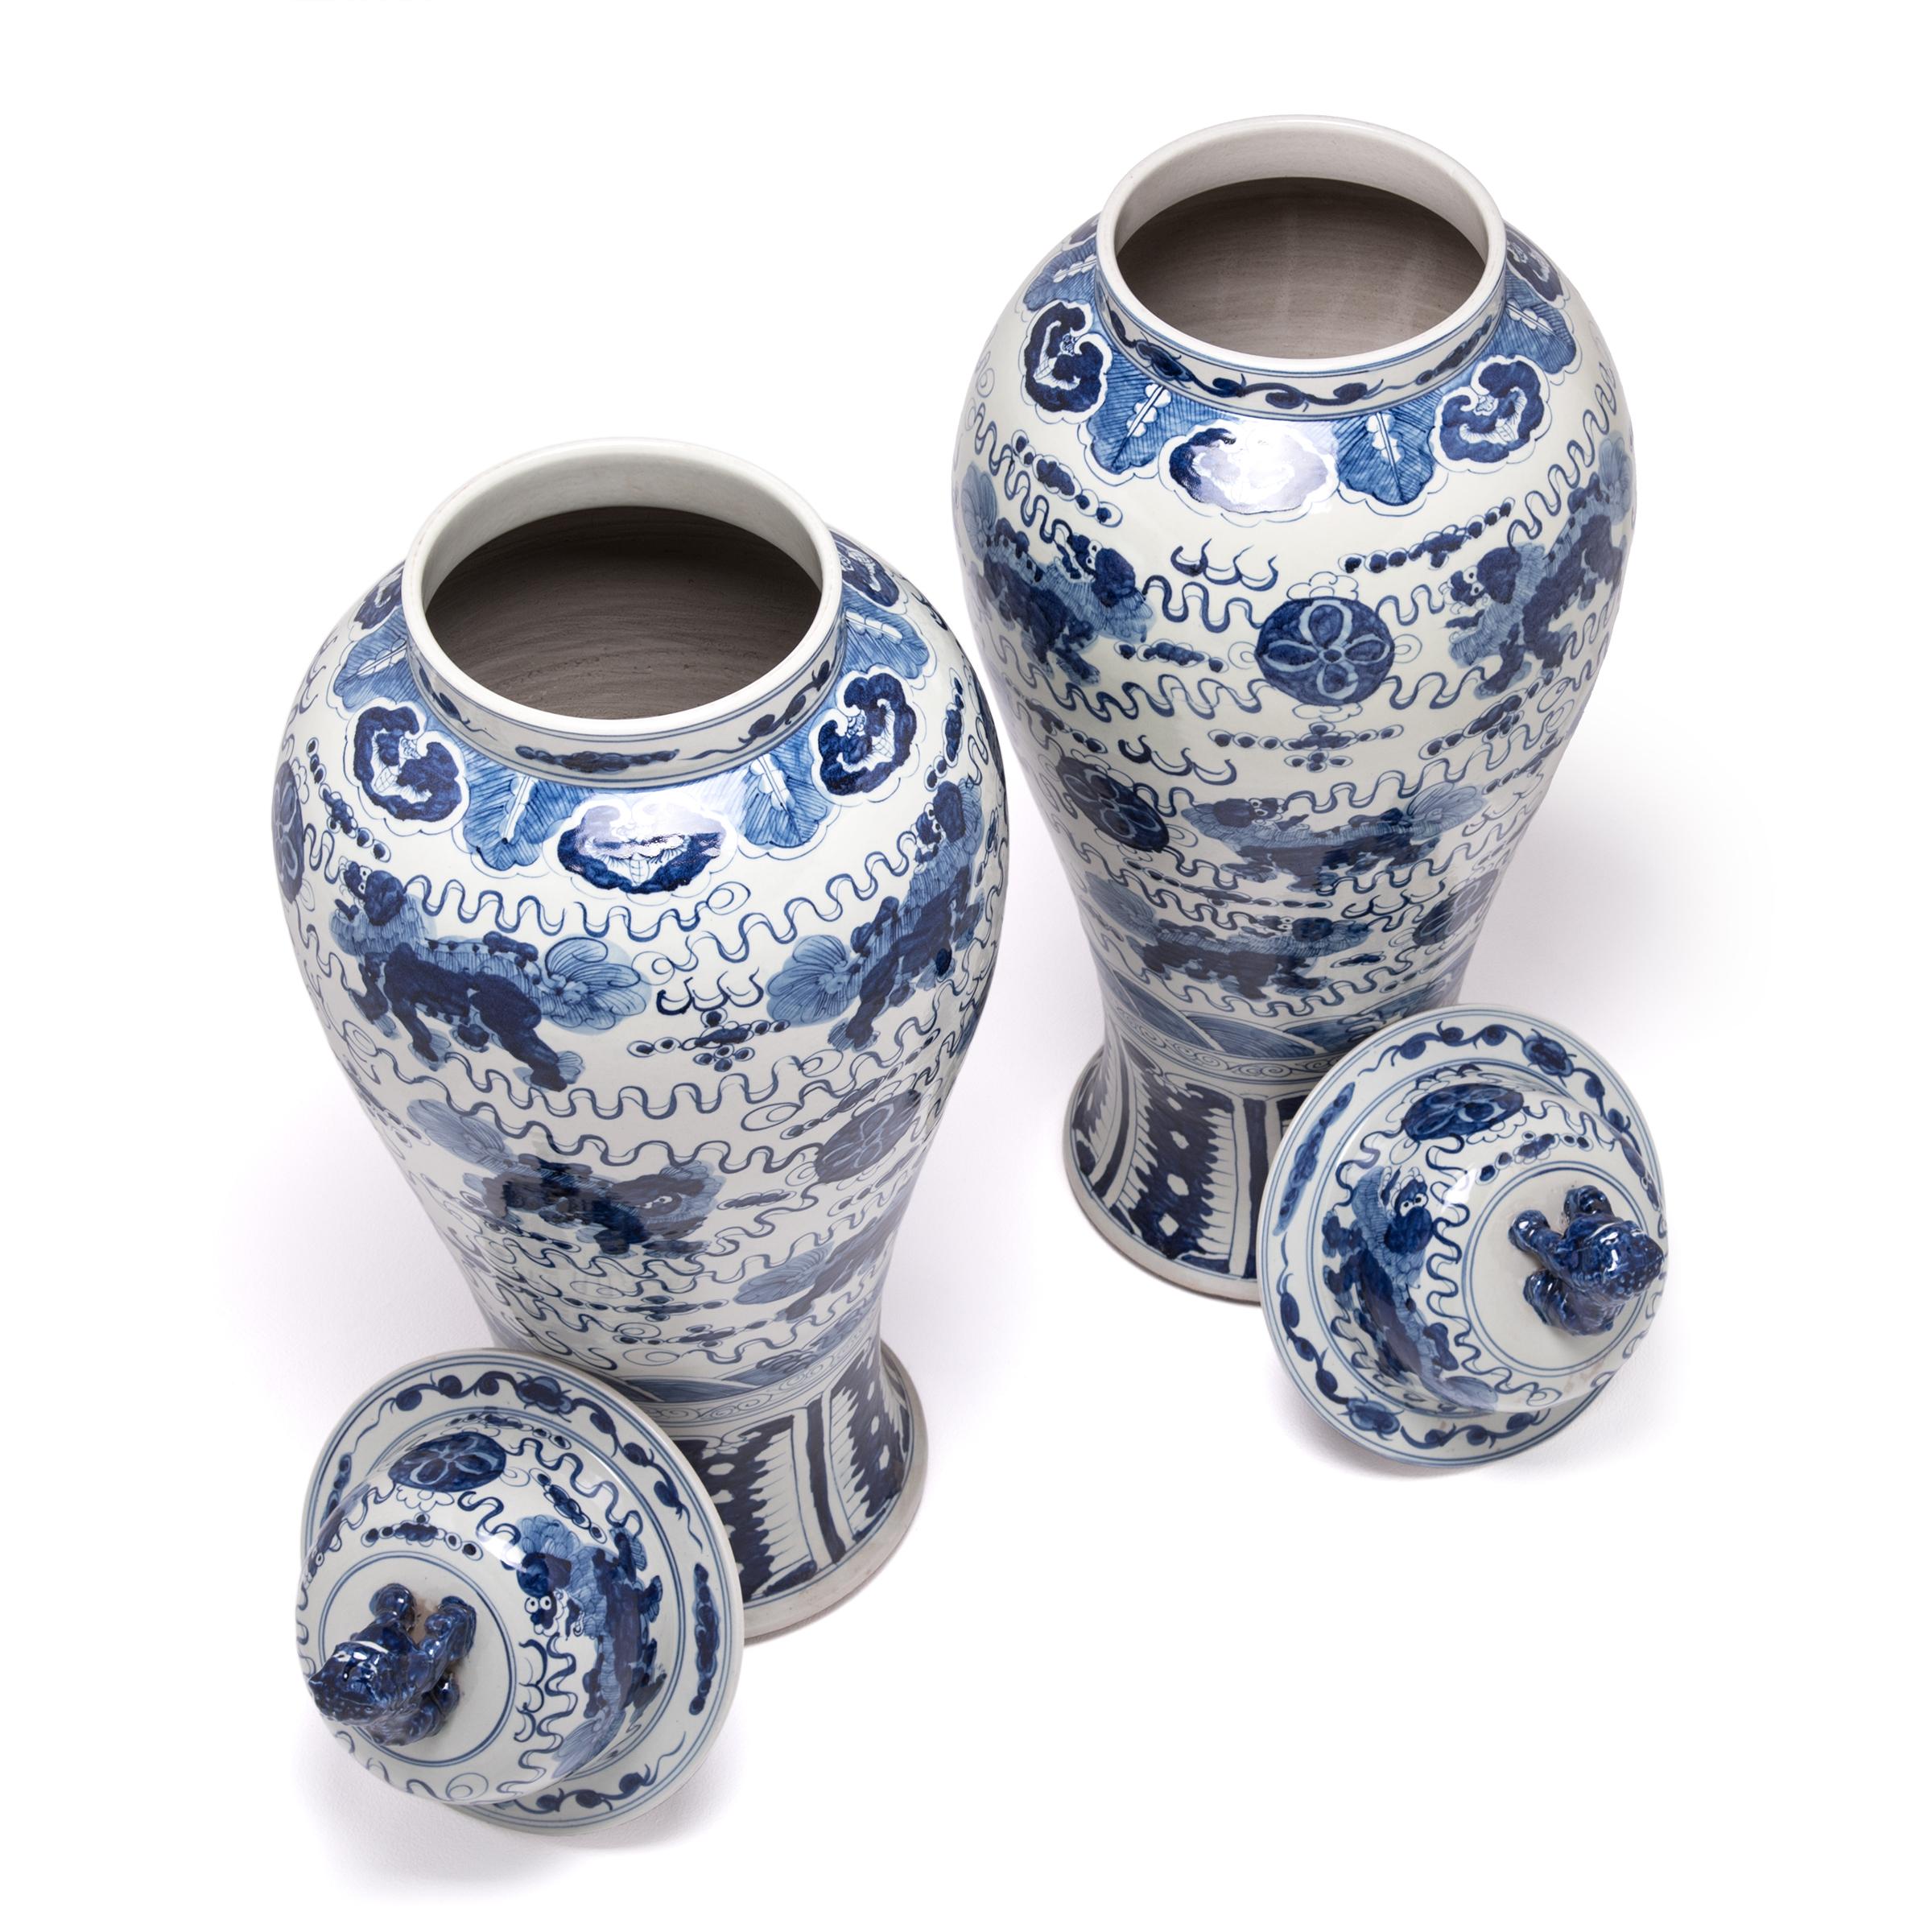 Dating back to the Tang dynasty, blue and white porcelain has played a long and celebrated role in Chinese ceramic history. Prized for its pristine white surface and finely painted decoration in rich cobalt blue, blue and white porcelain was